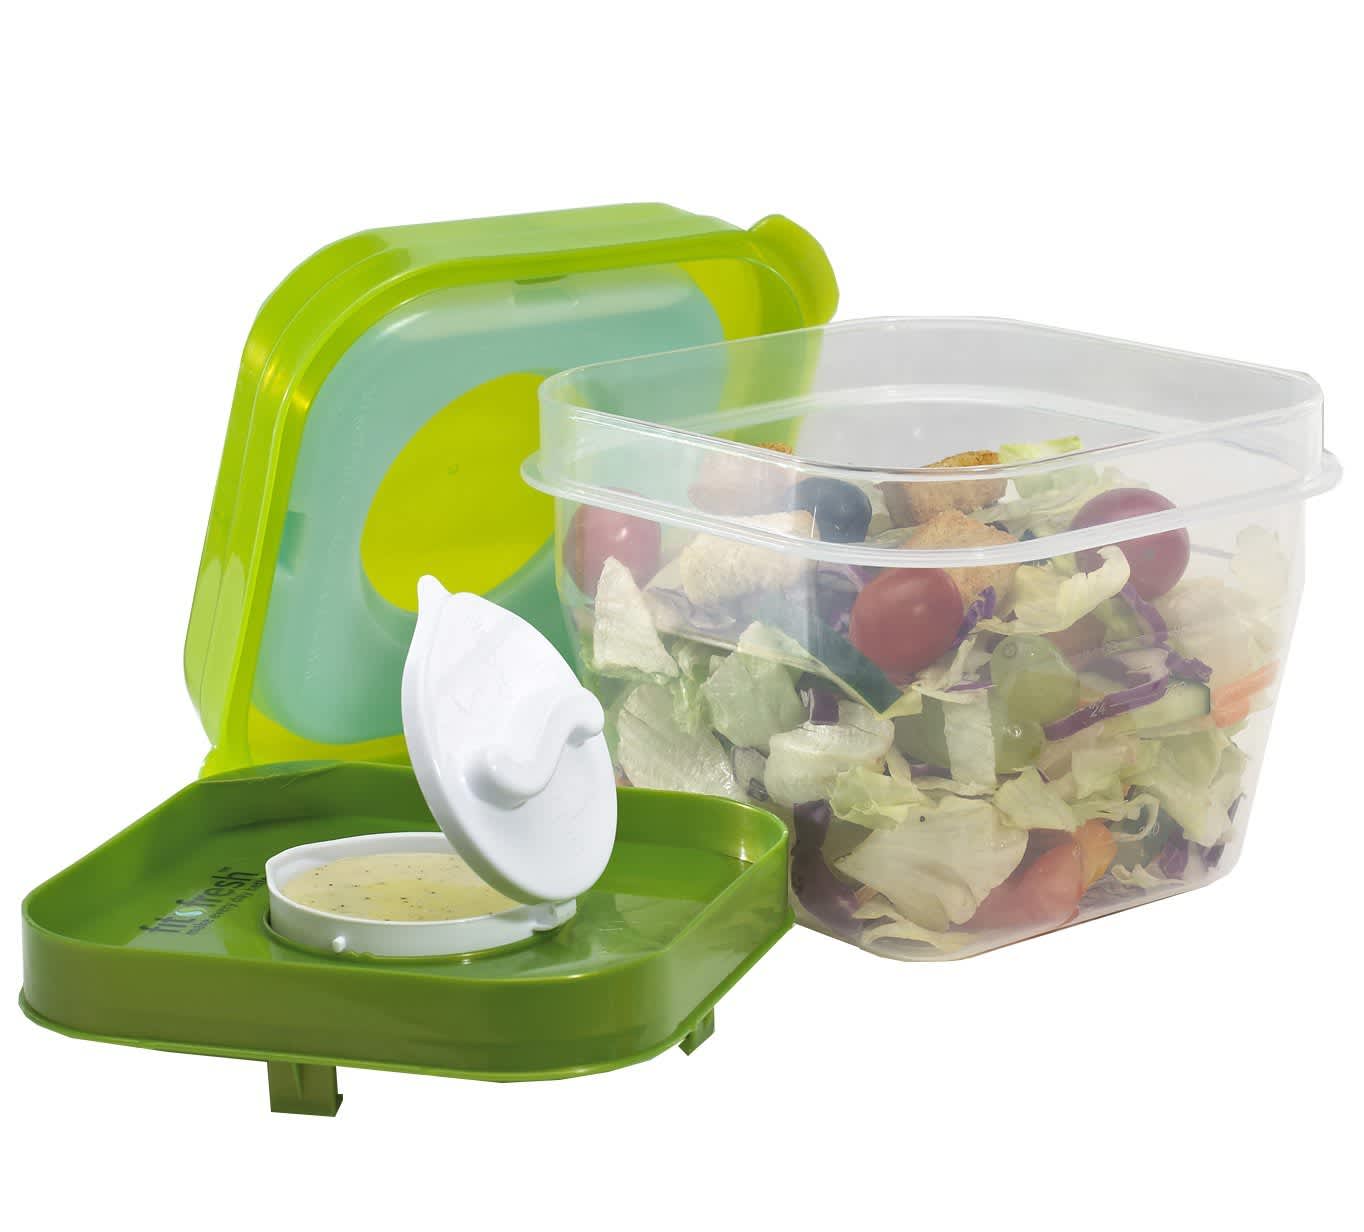 The Best Salad Containers of 2021 to Make Lunches Happy - walktoeat